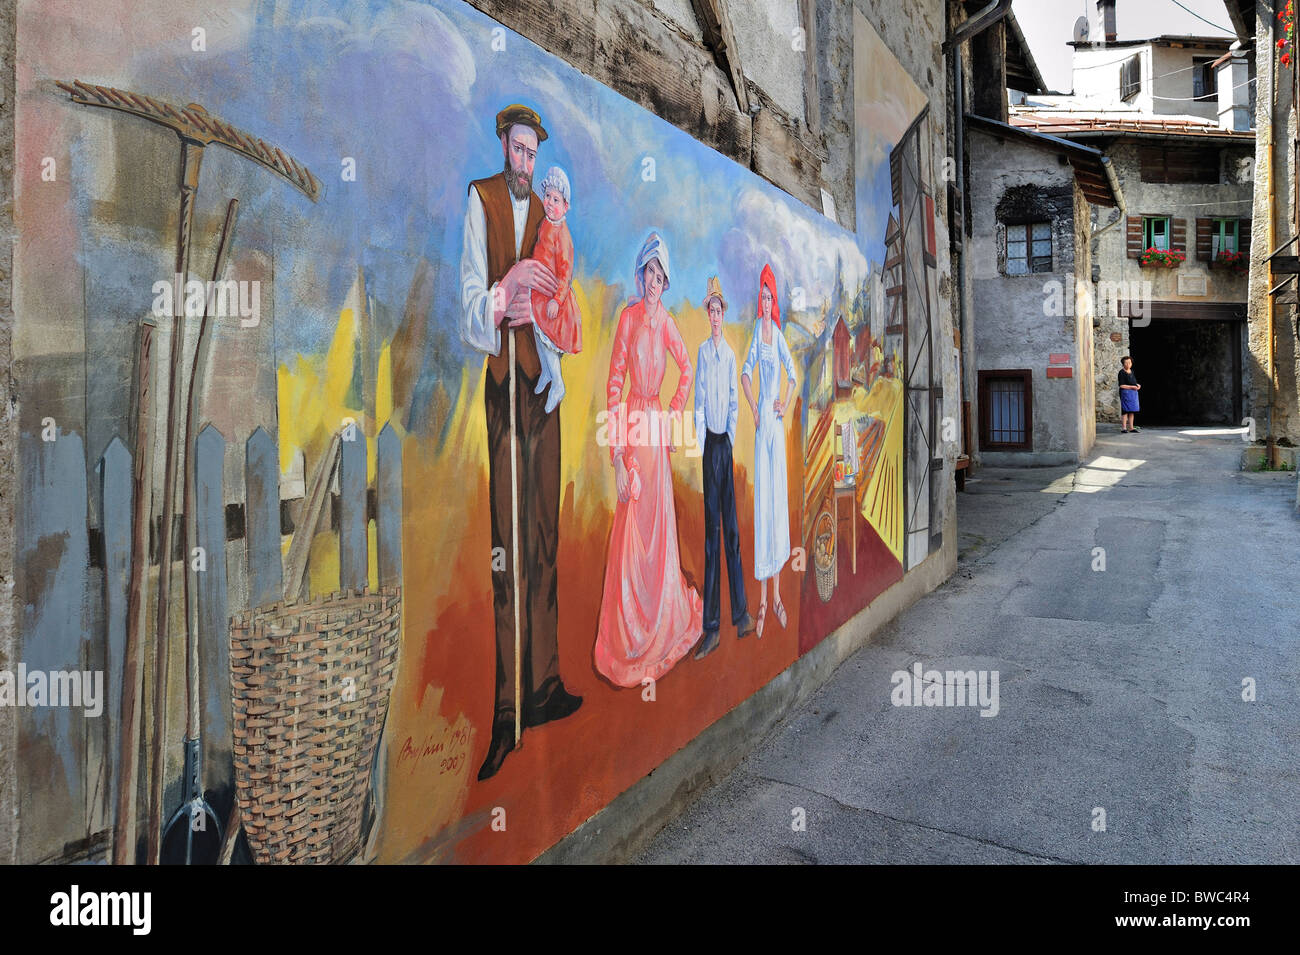 Murals on houses at Cibiana di Cadore, Dolomites, Italy Stock Photo